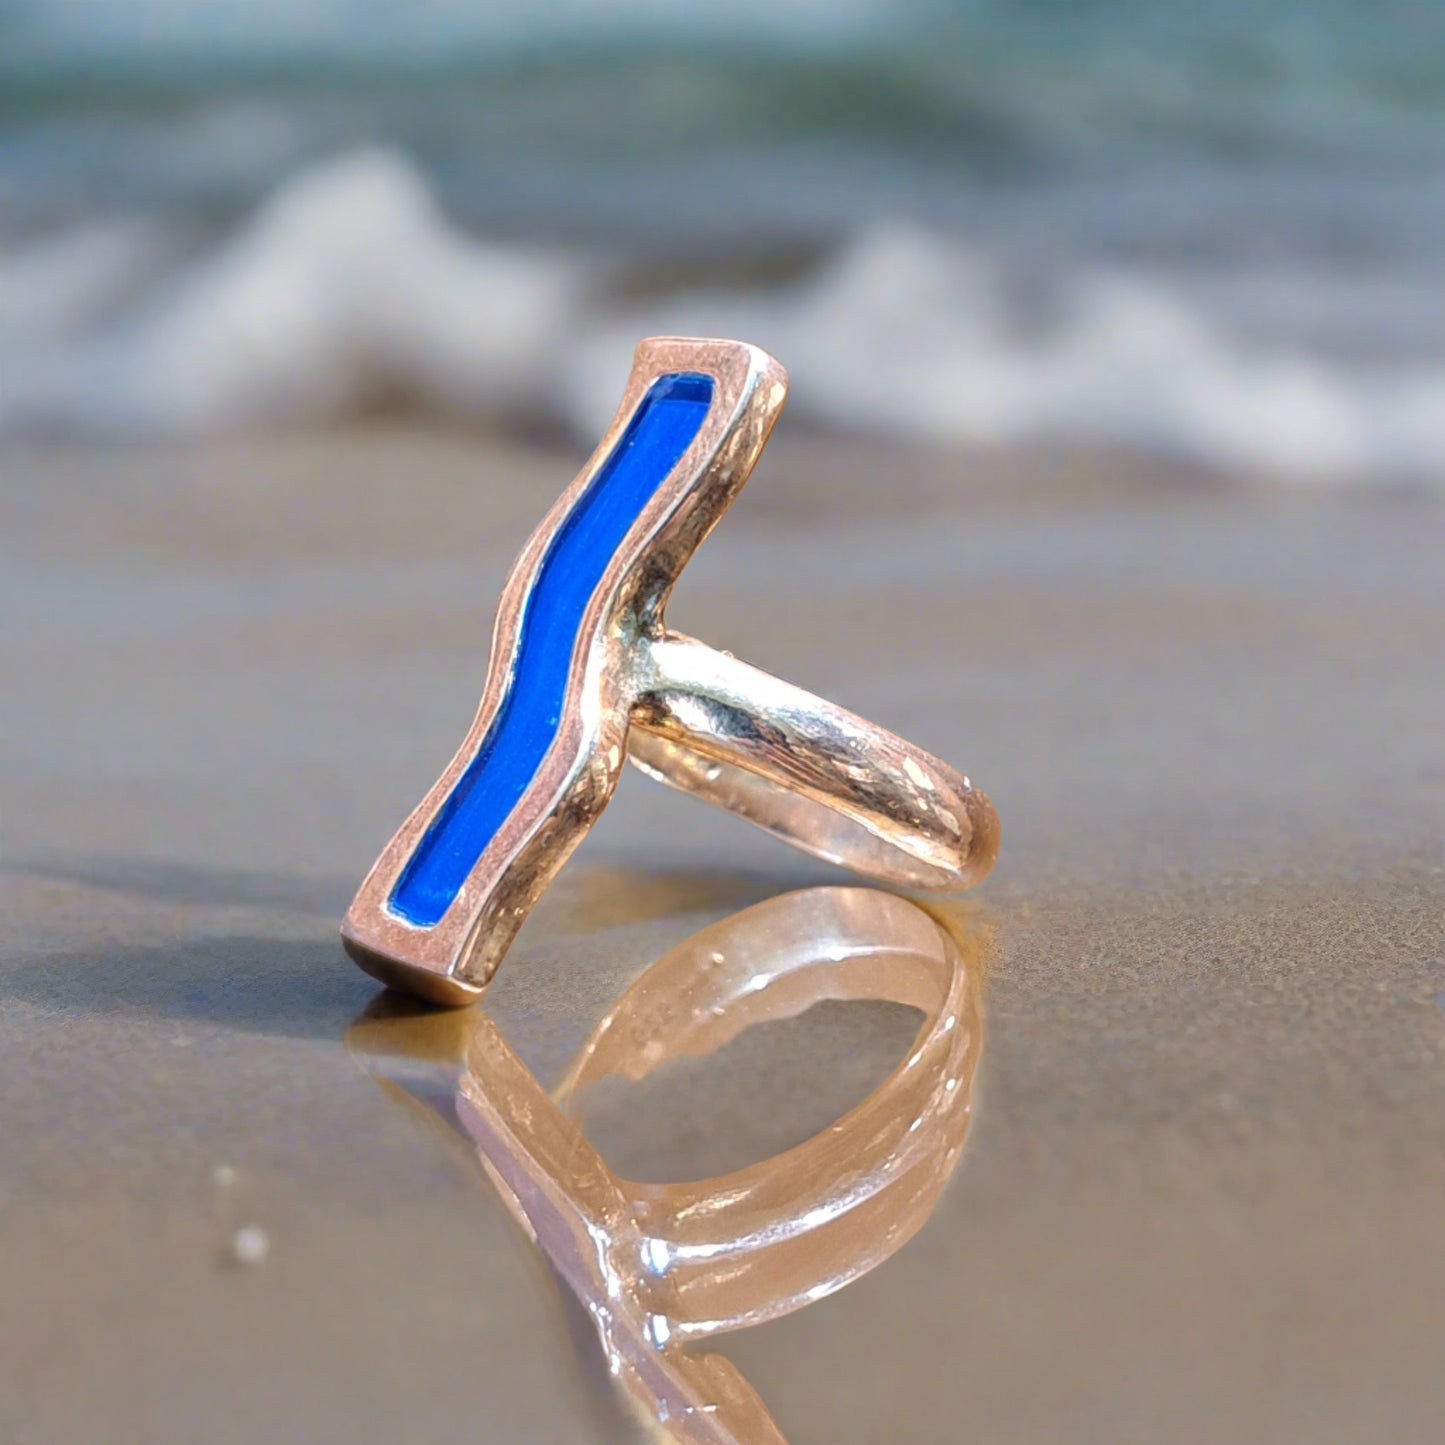 Gold plated silver ring with blue enamel